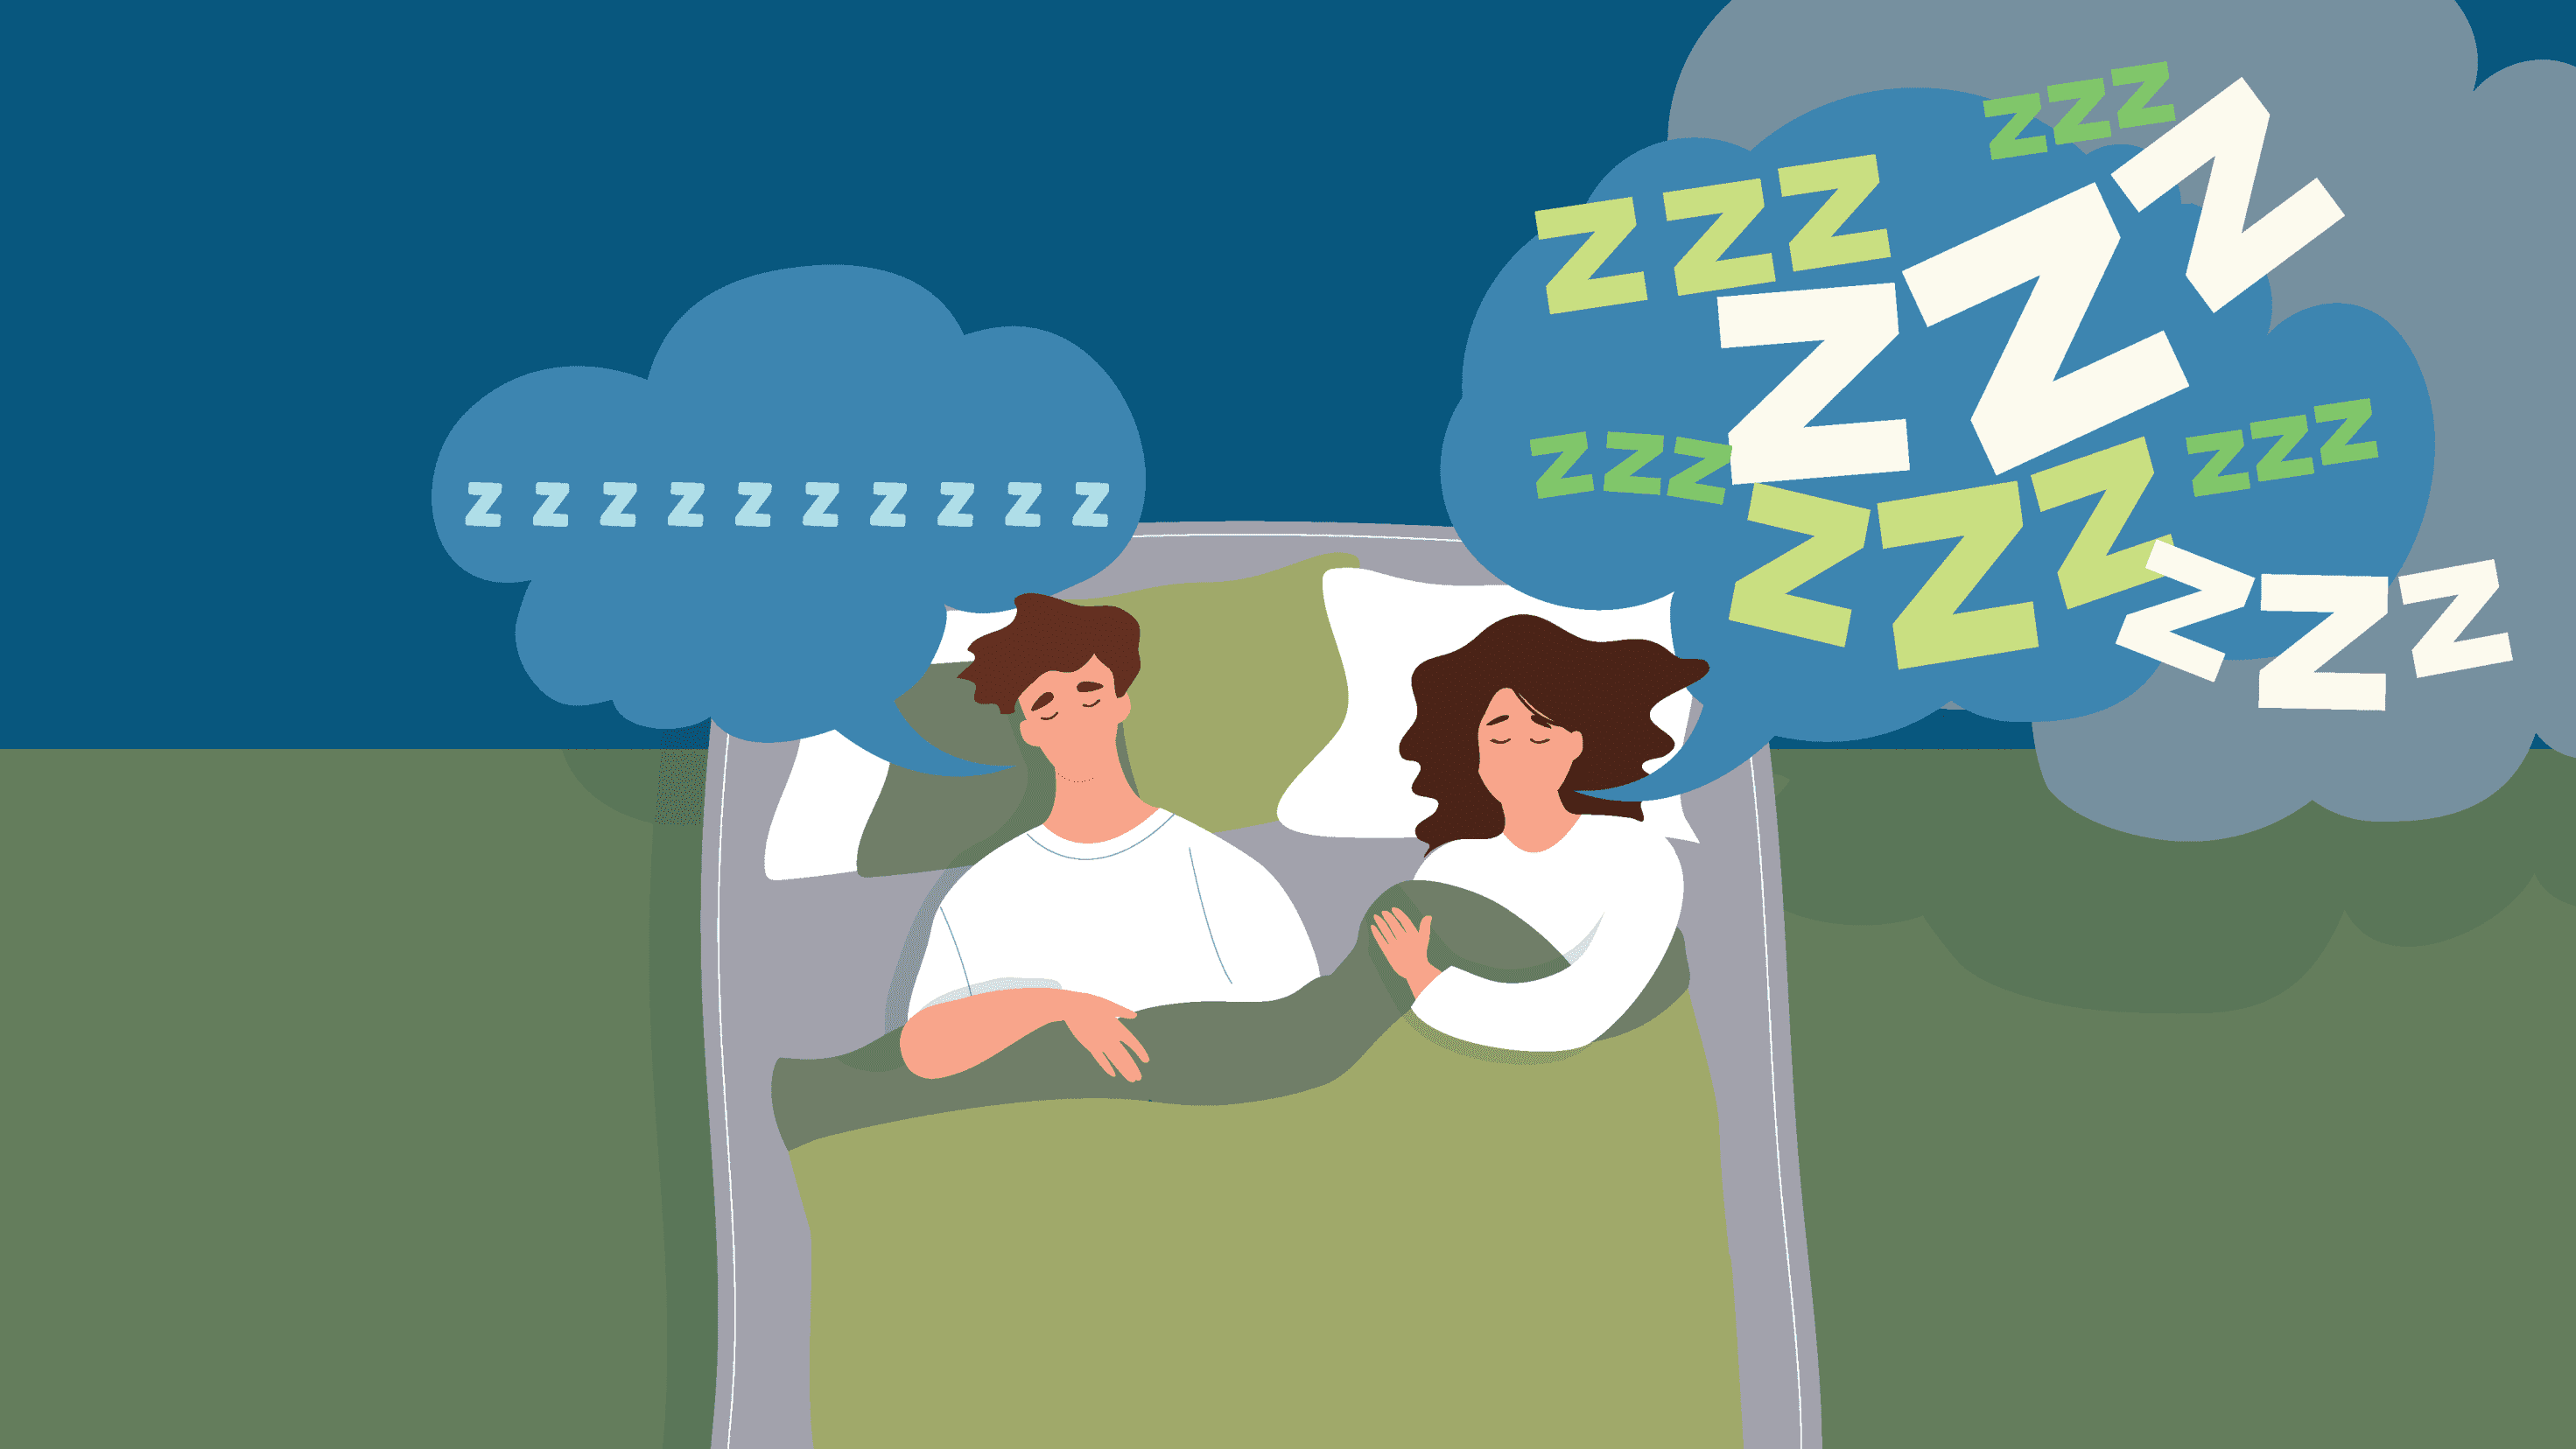 An illustration of a couple snoring in bed. Large speech bubbles with 'zzzzz' appear above each person's head.